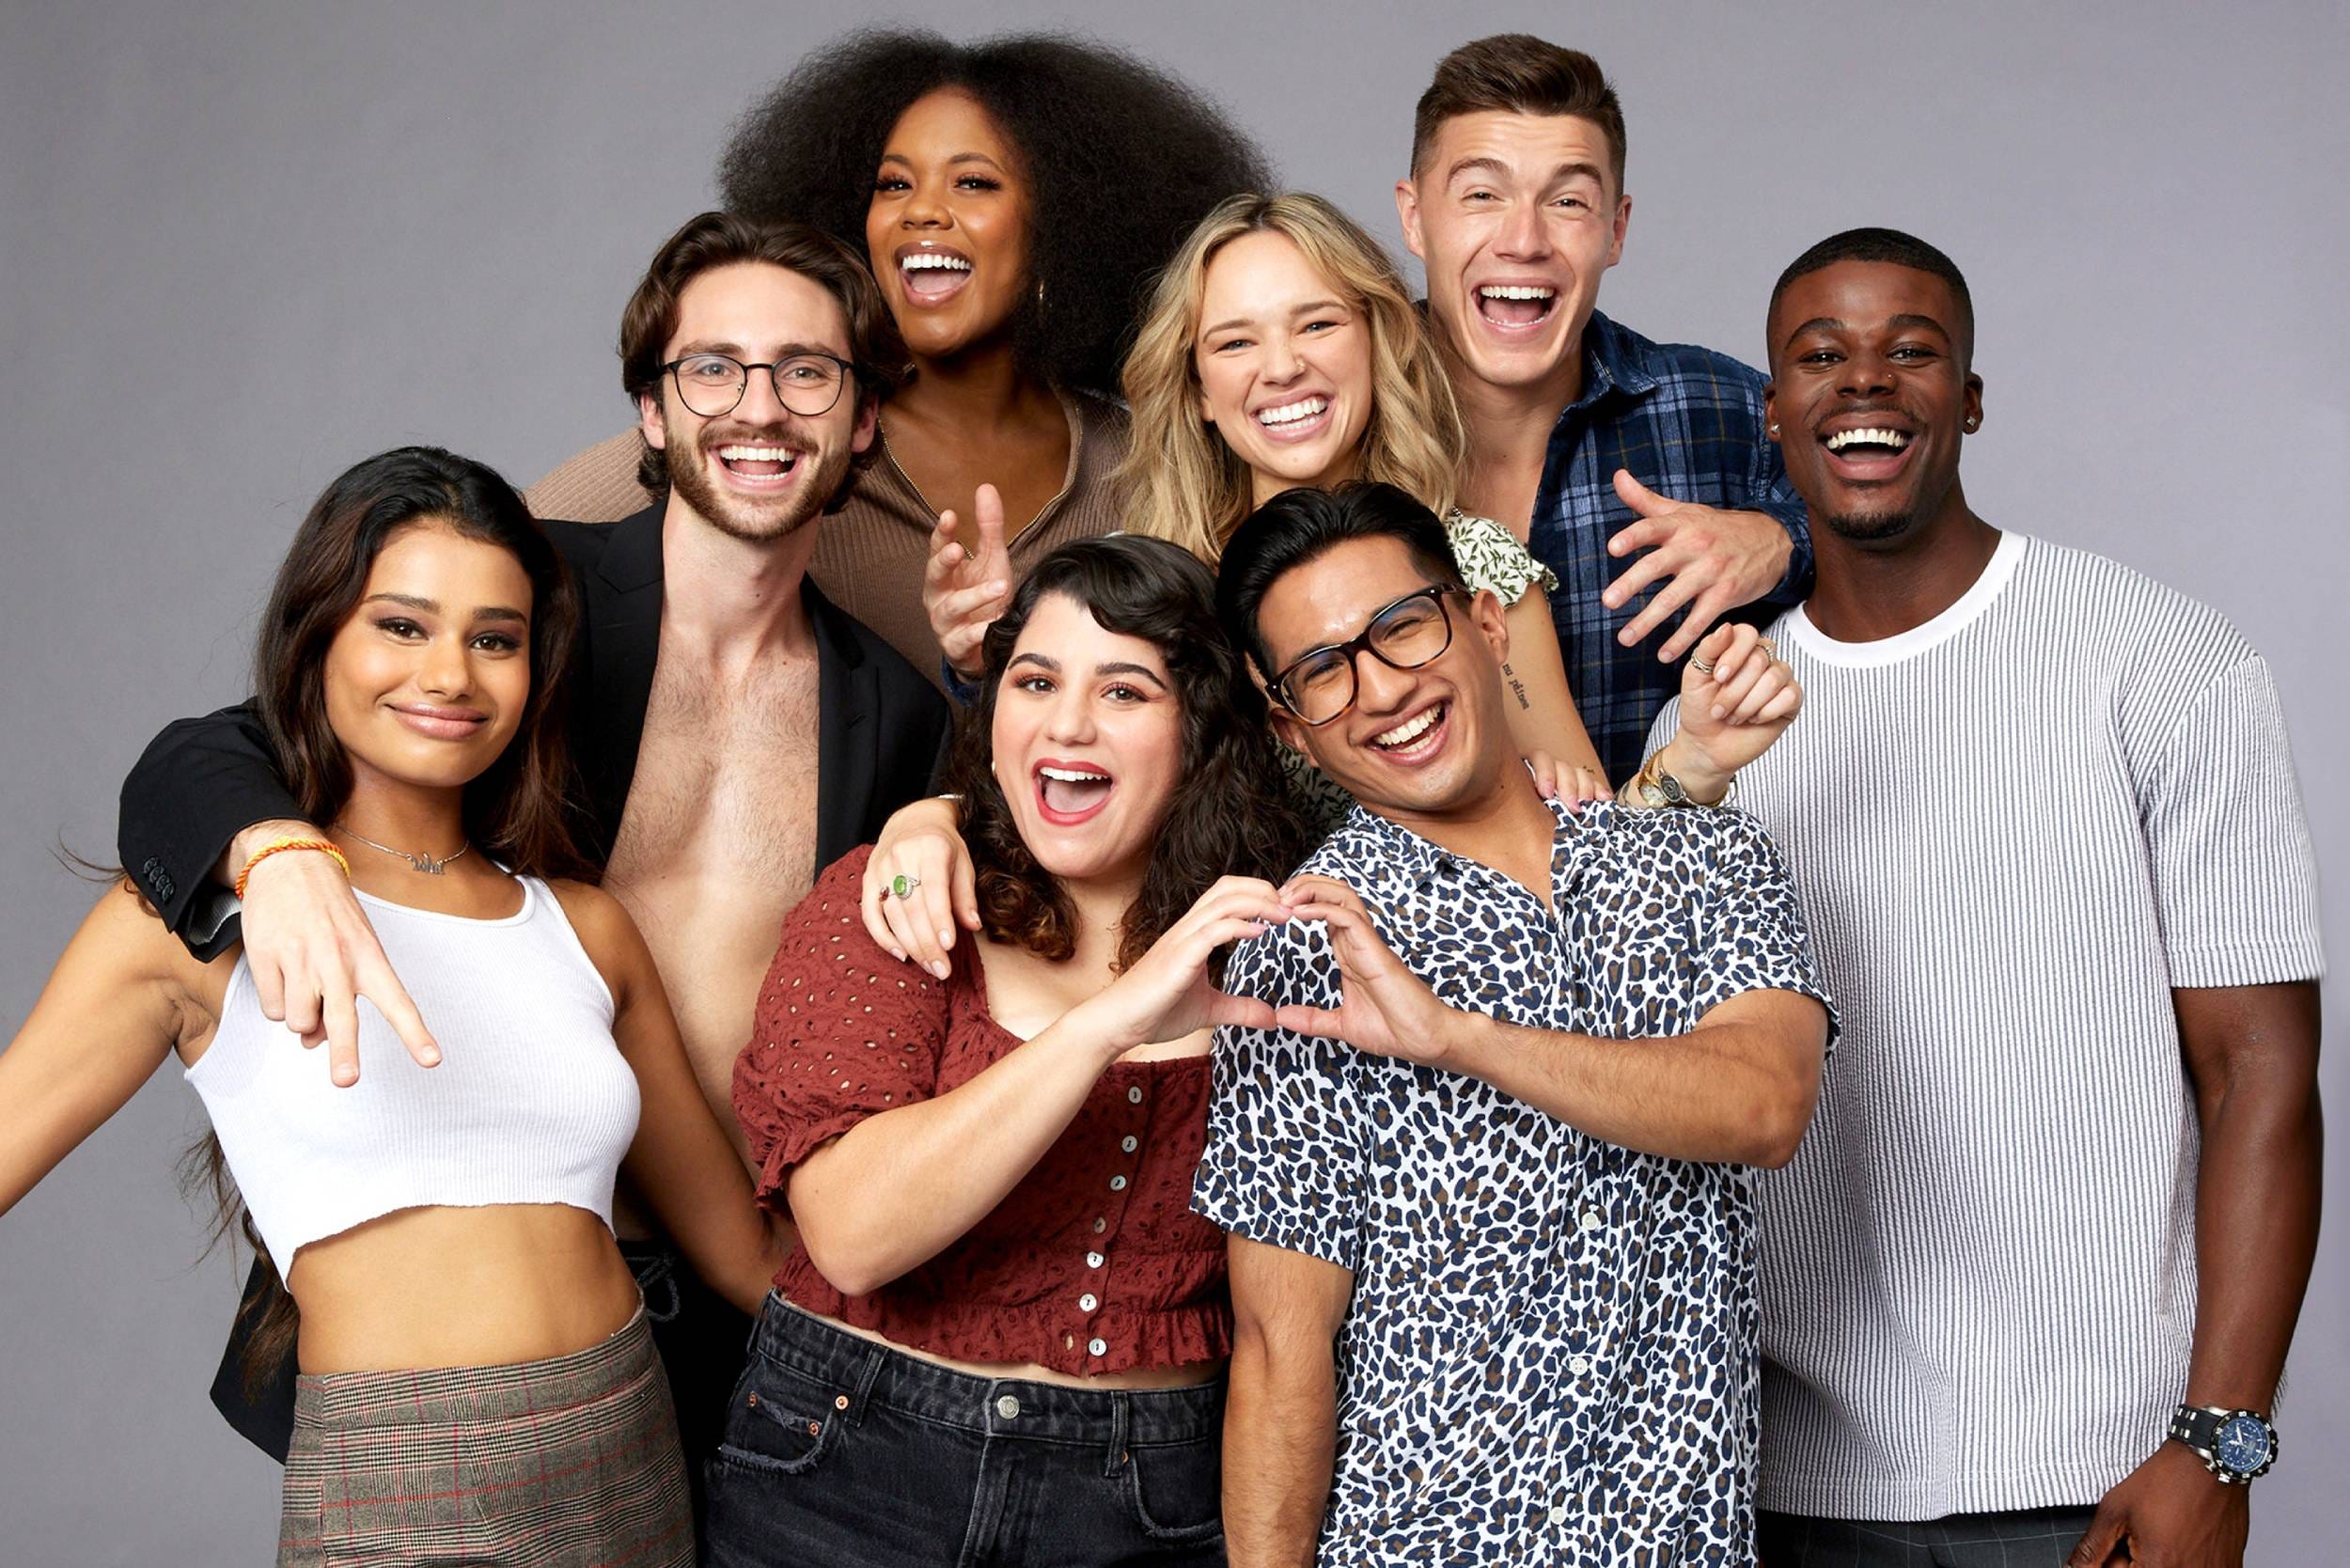 The cast of "Twentysomethings: Austin" navigate life in the city in a new Netflix reality show.